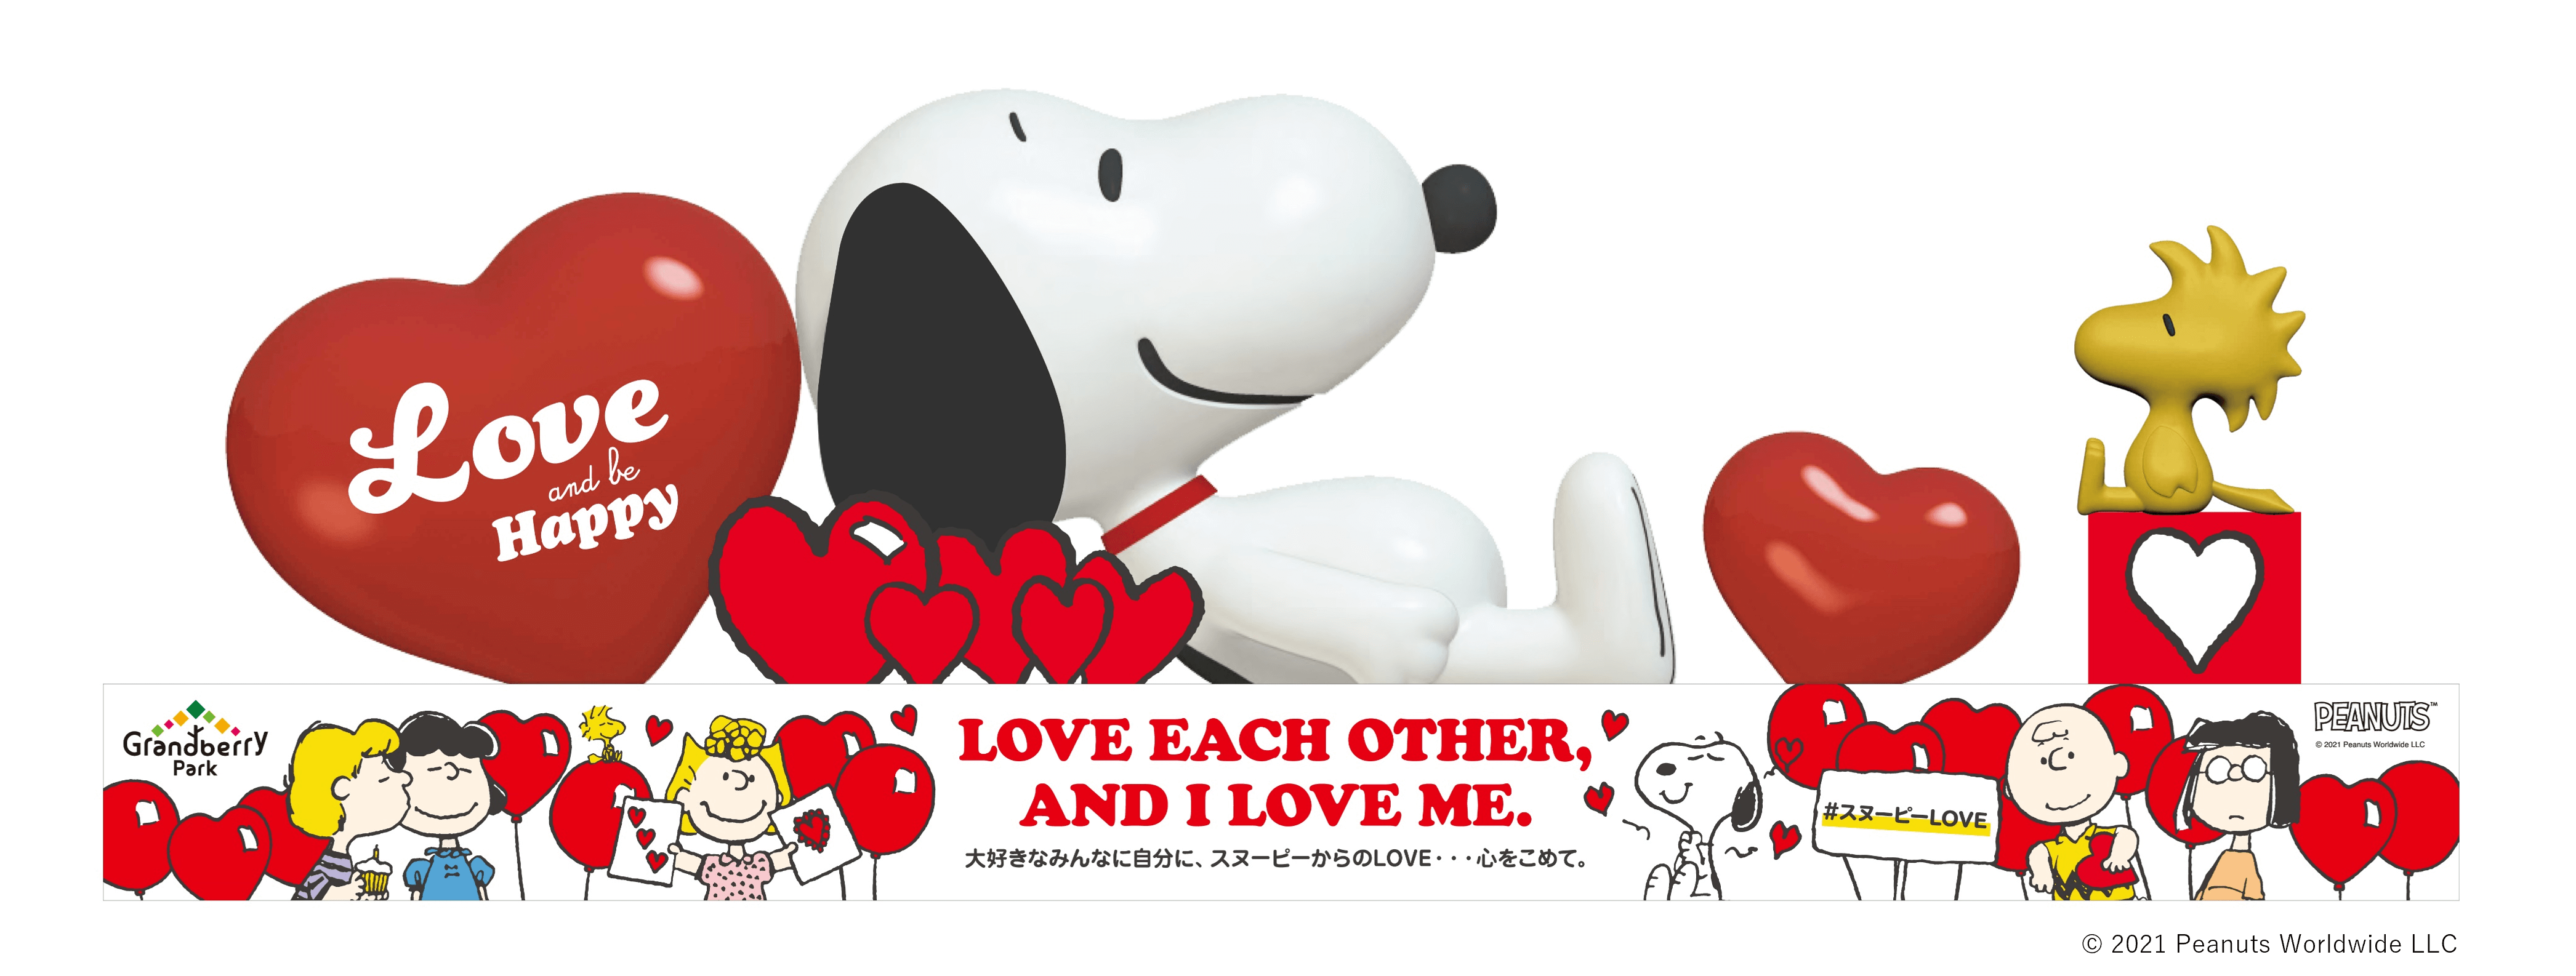 snoopy-happiness-float-2021-in-grandberry-park2